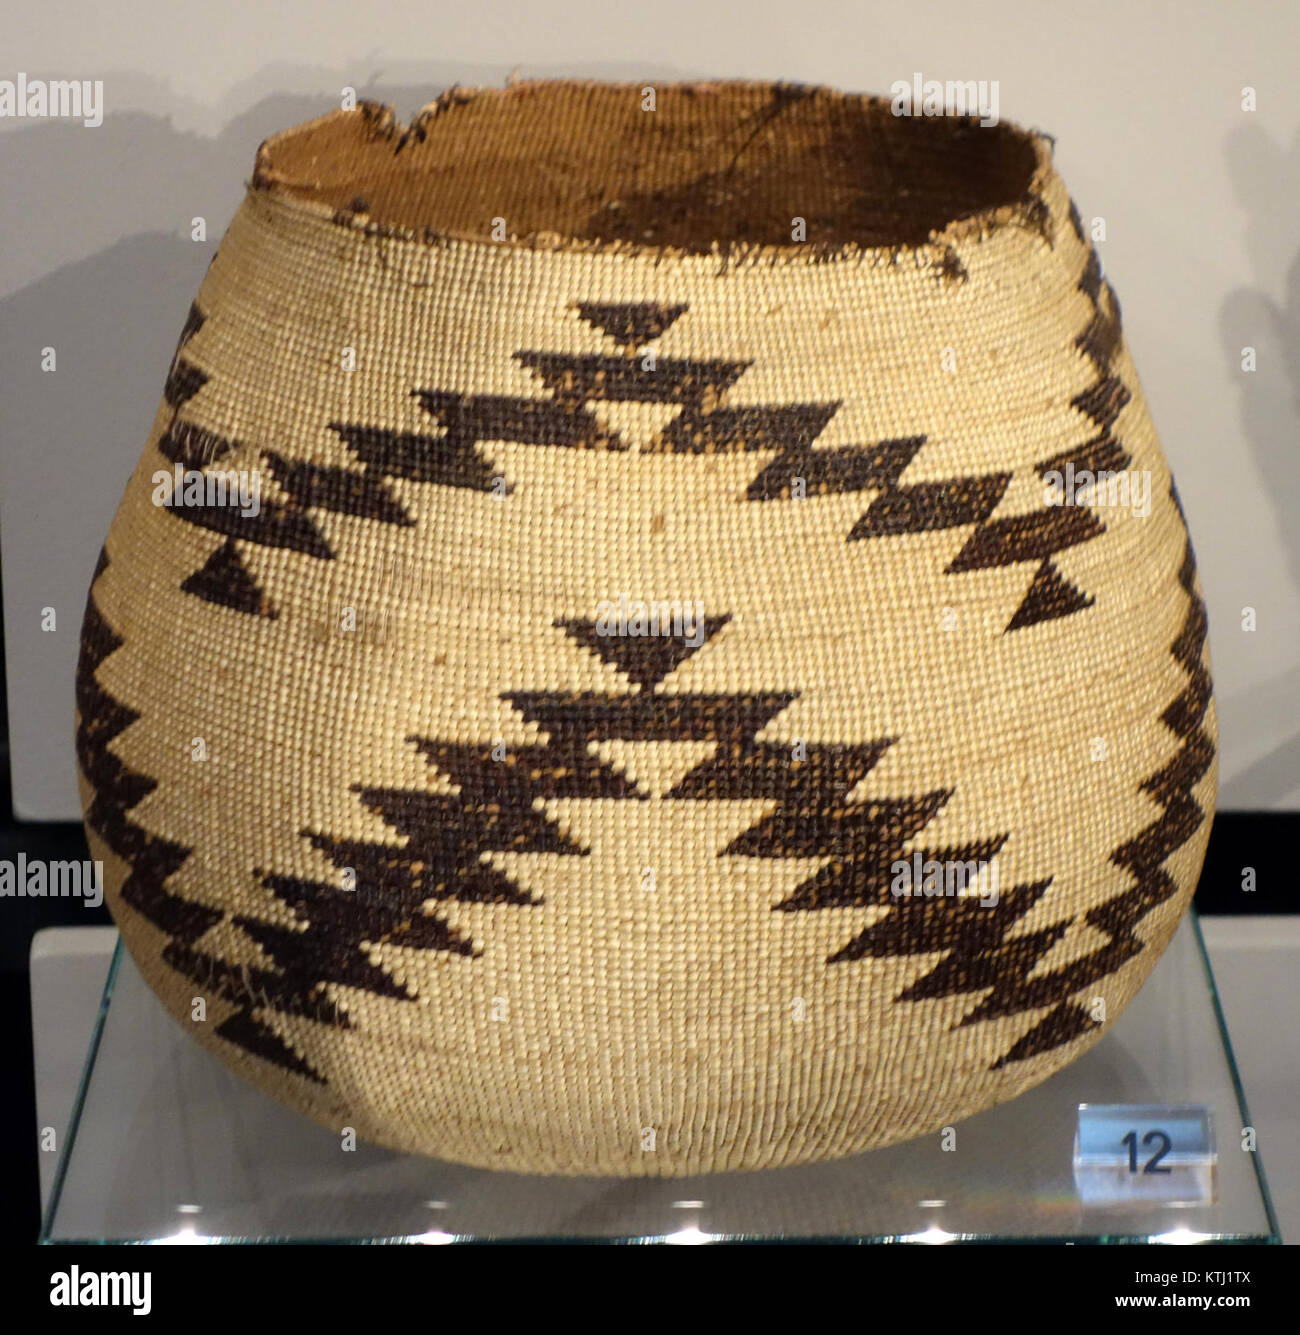 Basket, Hupa people, Southern California, late 19th to early 20th century, twined tule root and bear grass   Chazen Museum of Art   DSC01863 Stock Photo